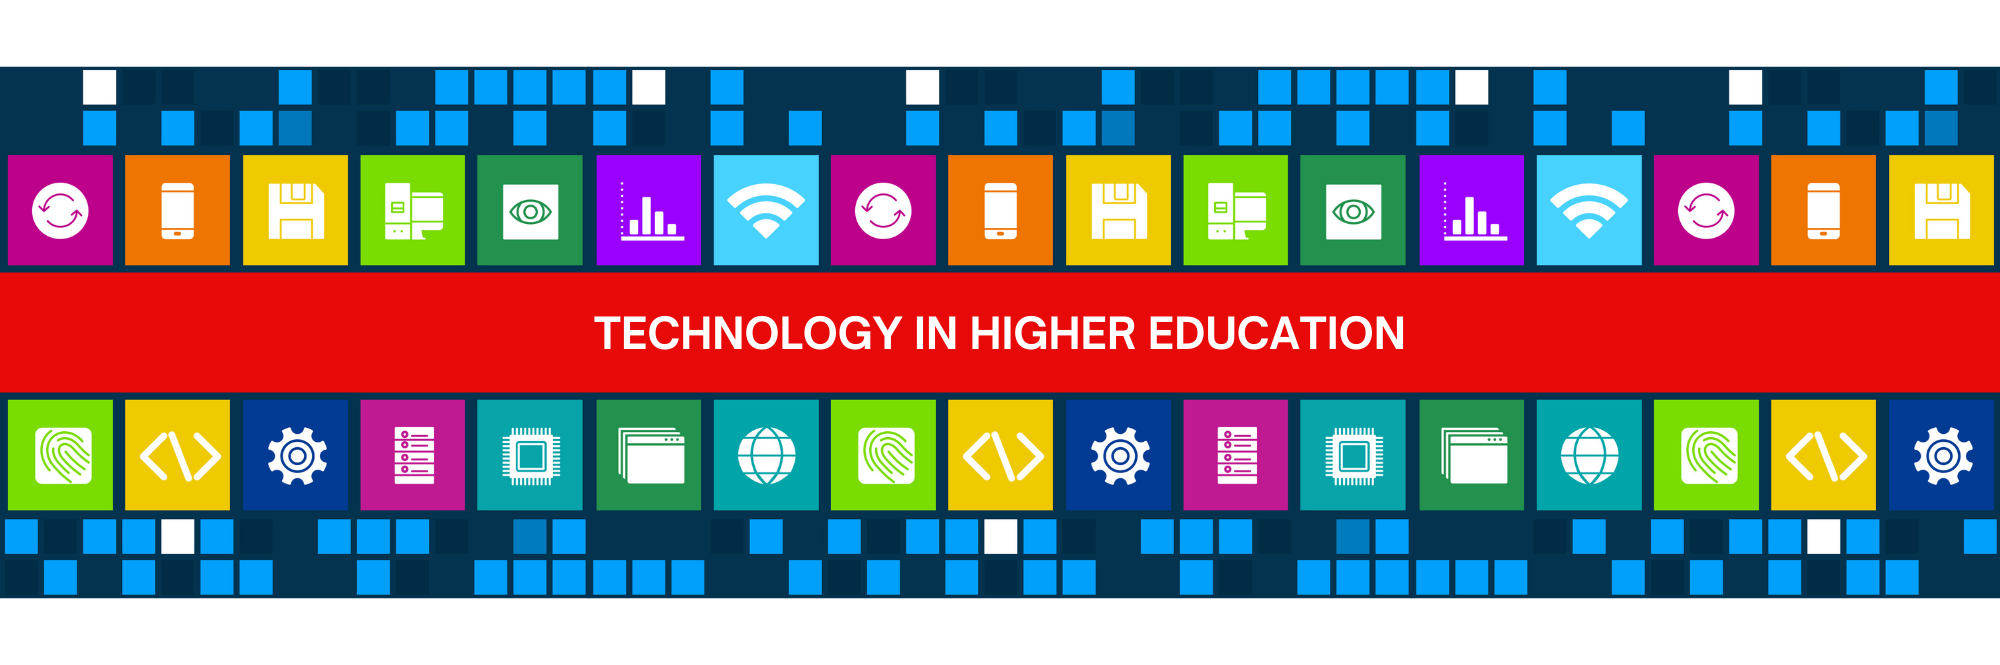 Technology in higher education